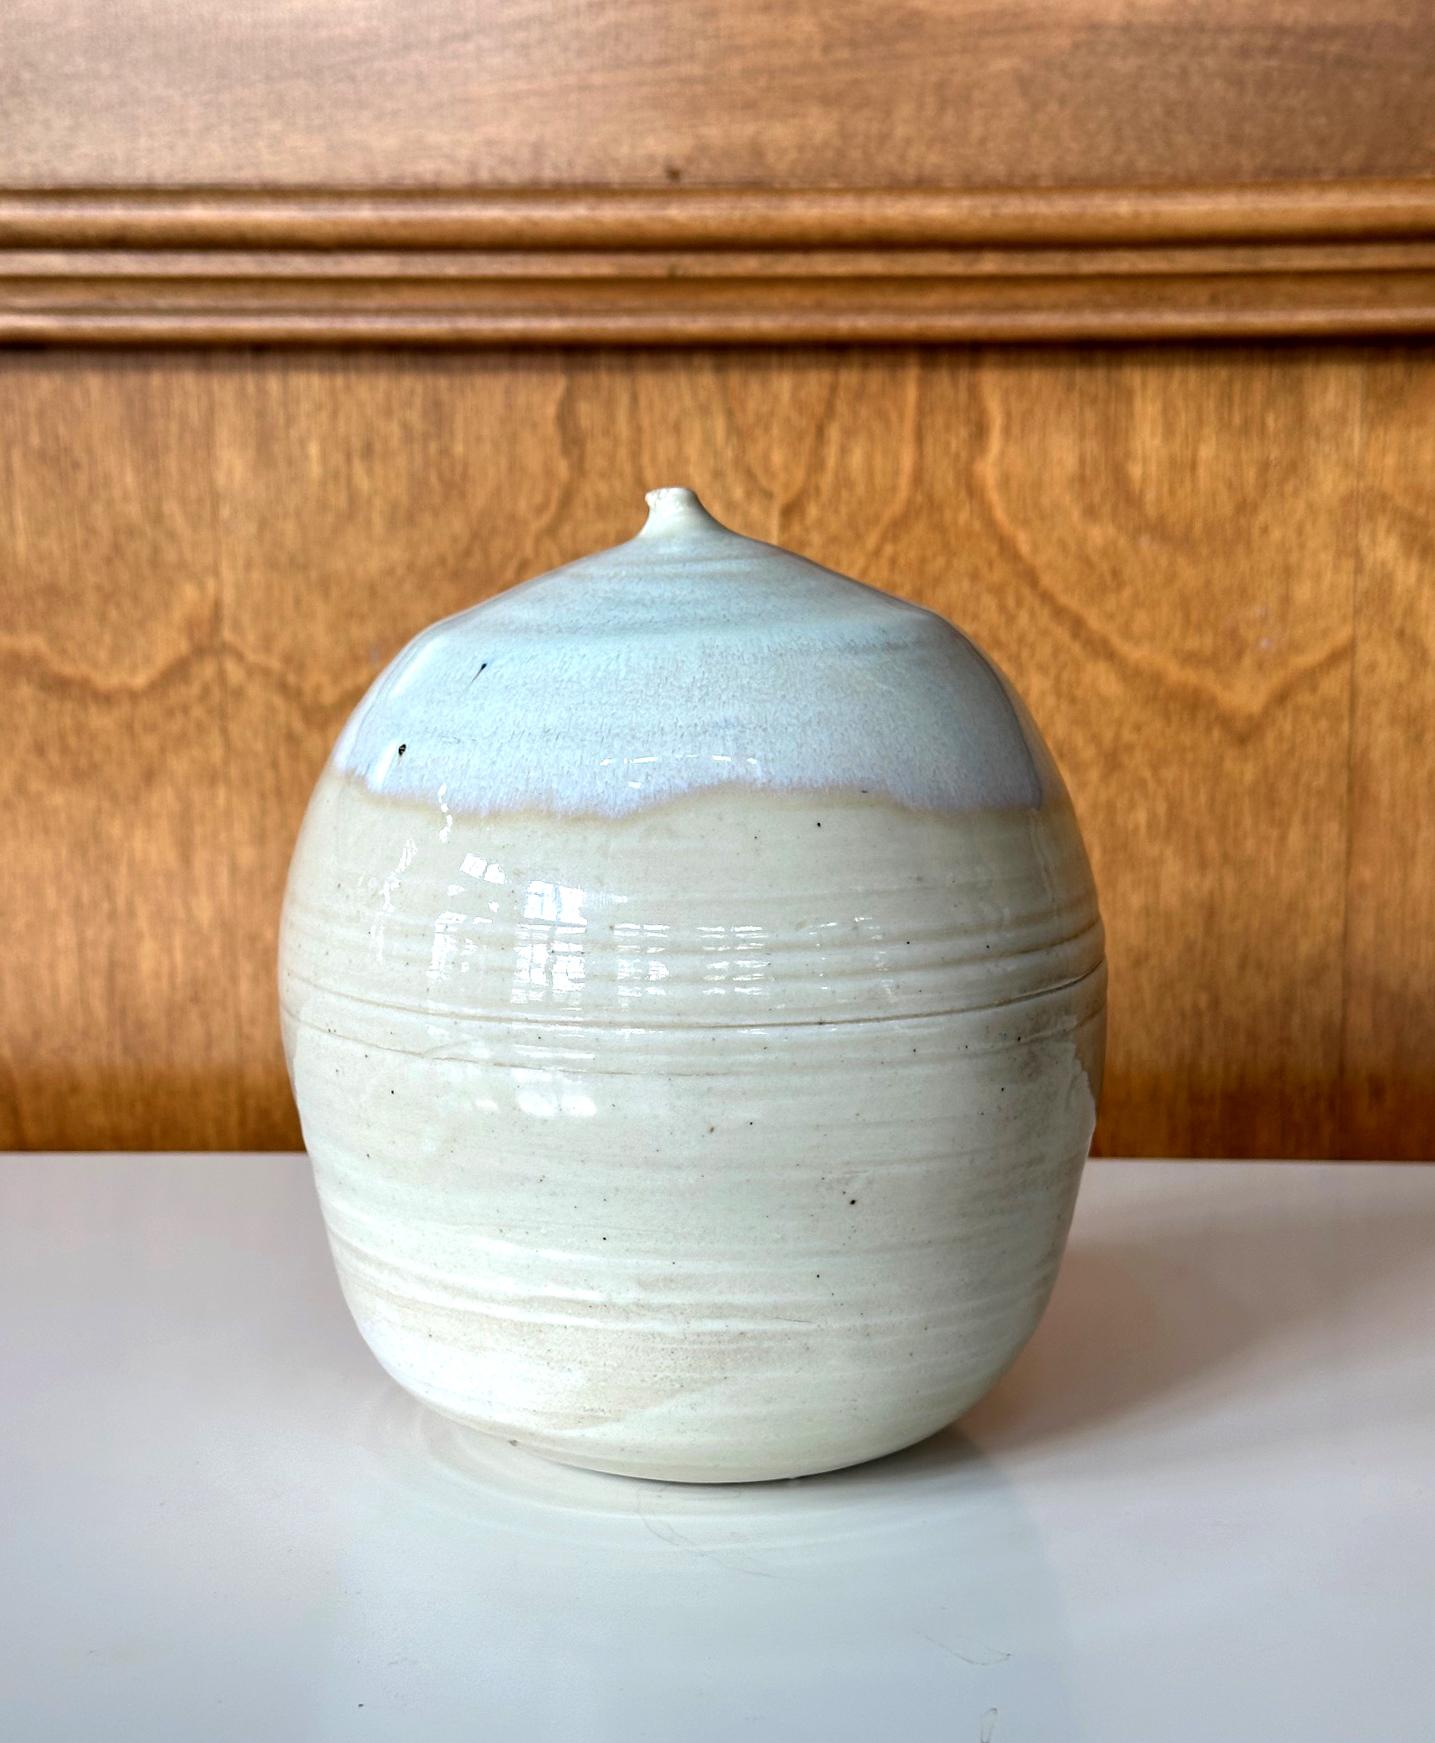 A ceramic closed-form pot with rattle by Japanese American artist Toshiko Takaezu (American, 1922 - 2011). 
The story: In the 1980s, potter Lola Rae invited Toshika to her ceramic studio and kiln in Ojai, CA to teach a class. Lola Rae had previously